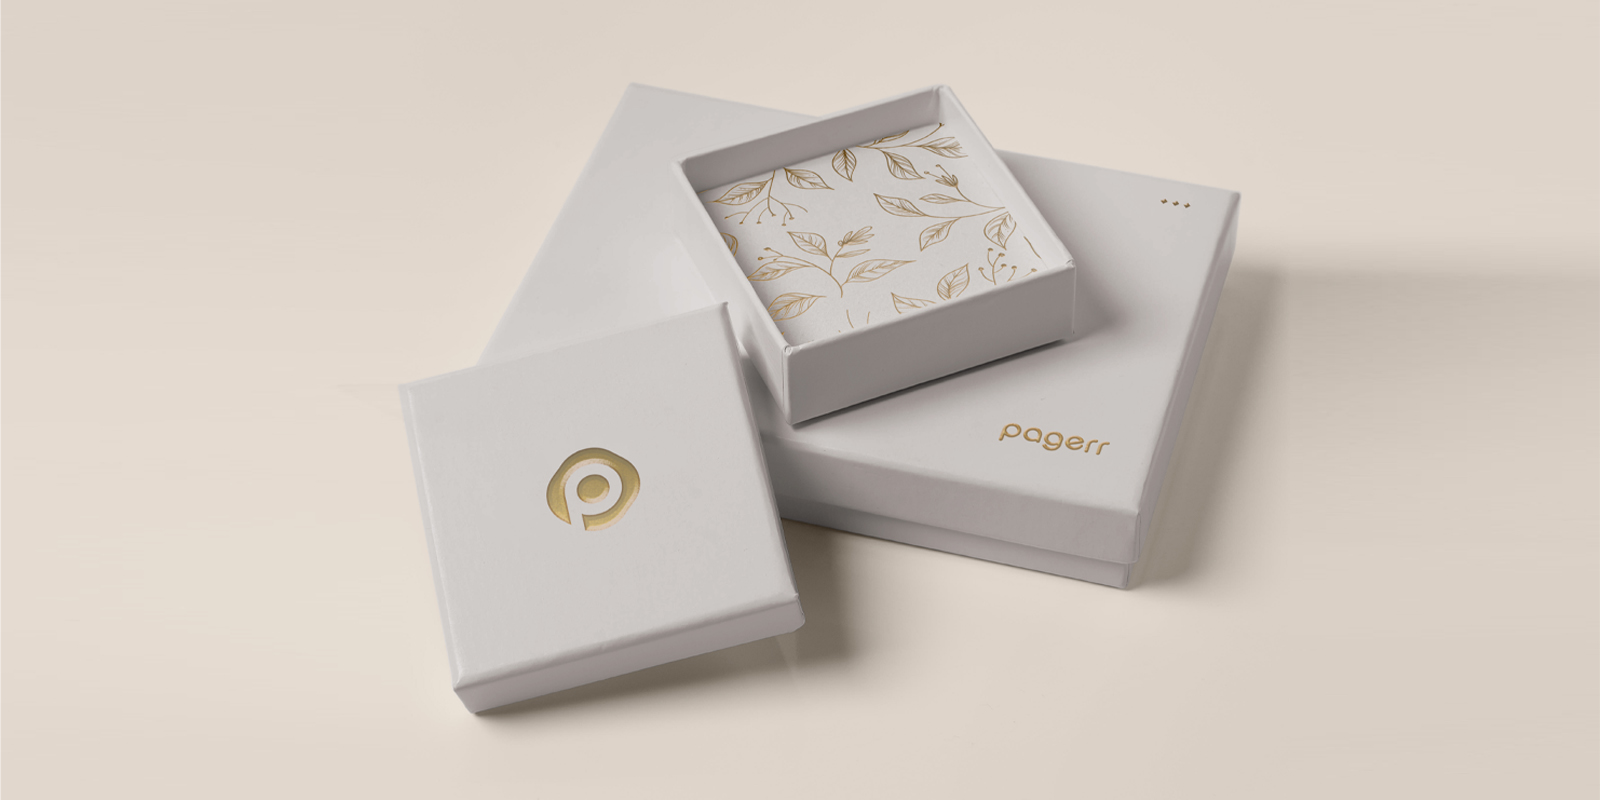 Product boxes in Berlin - Print with Pagerr